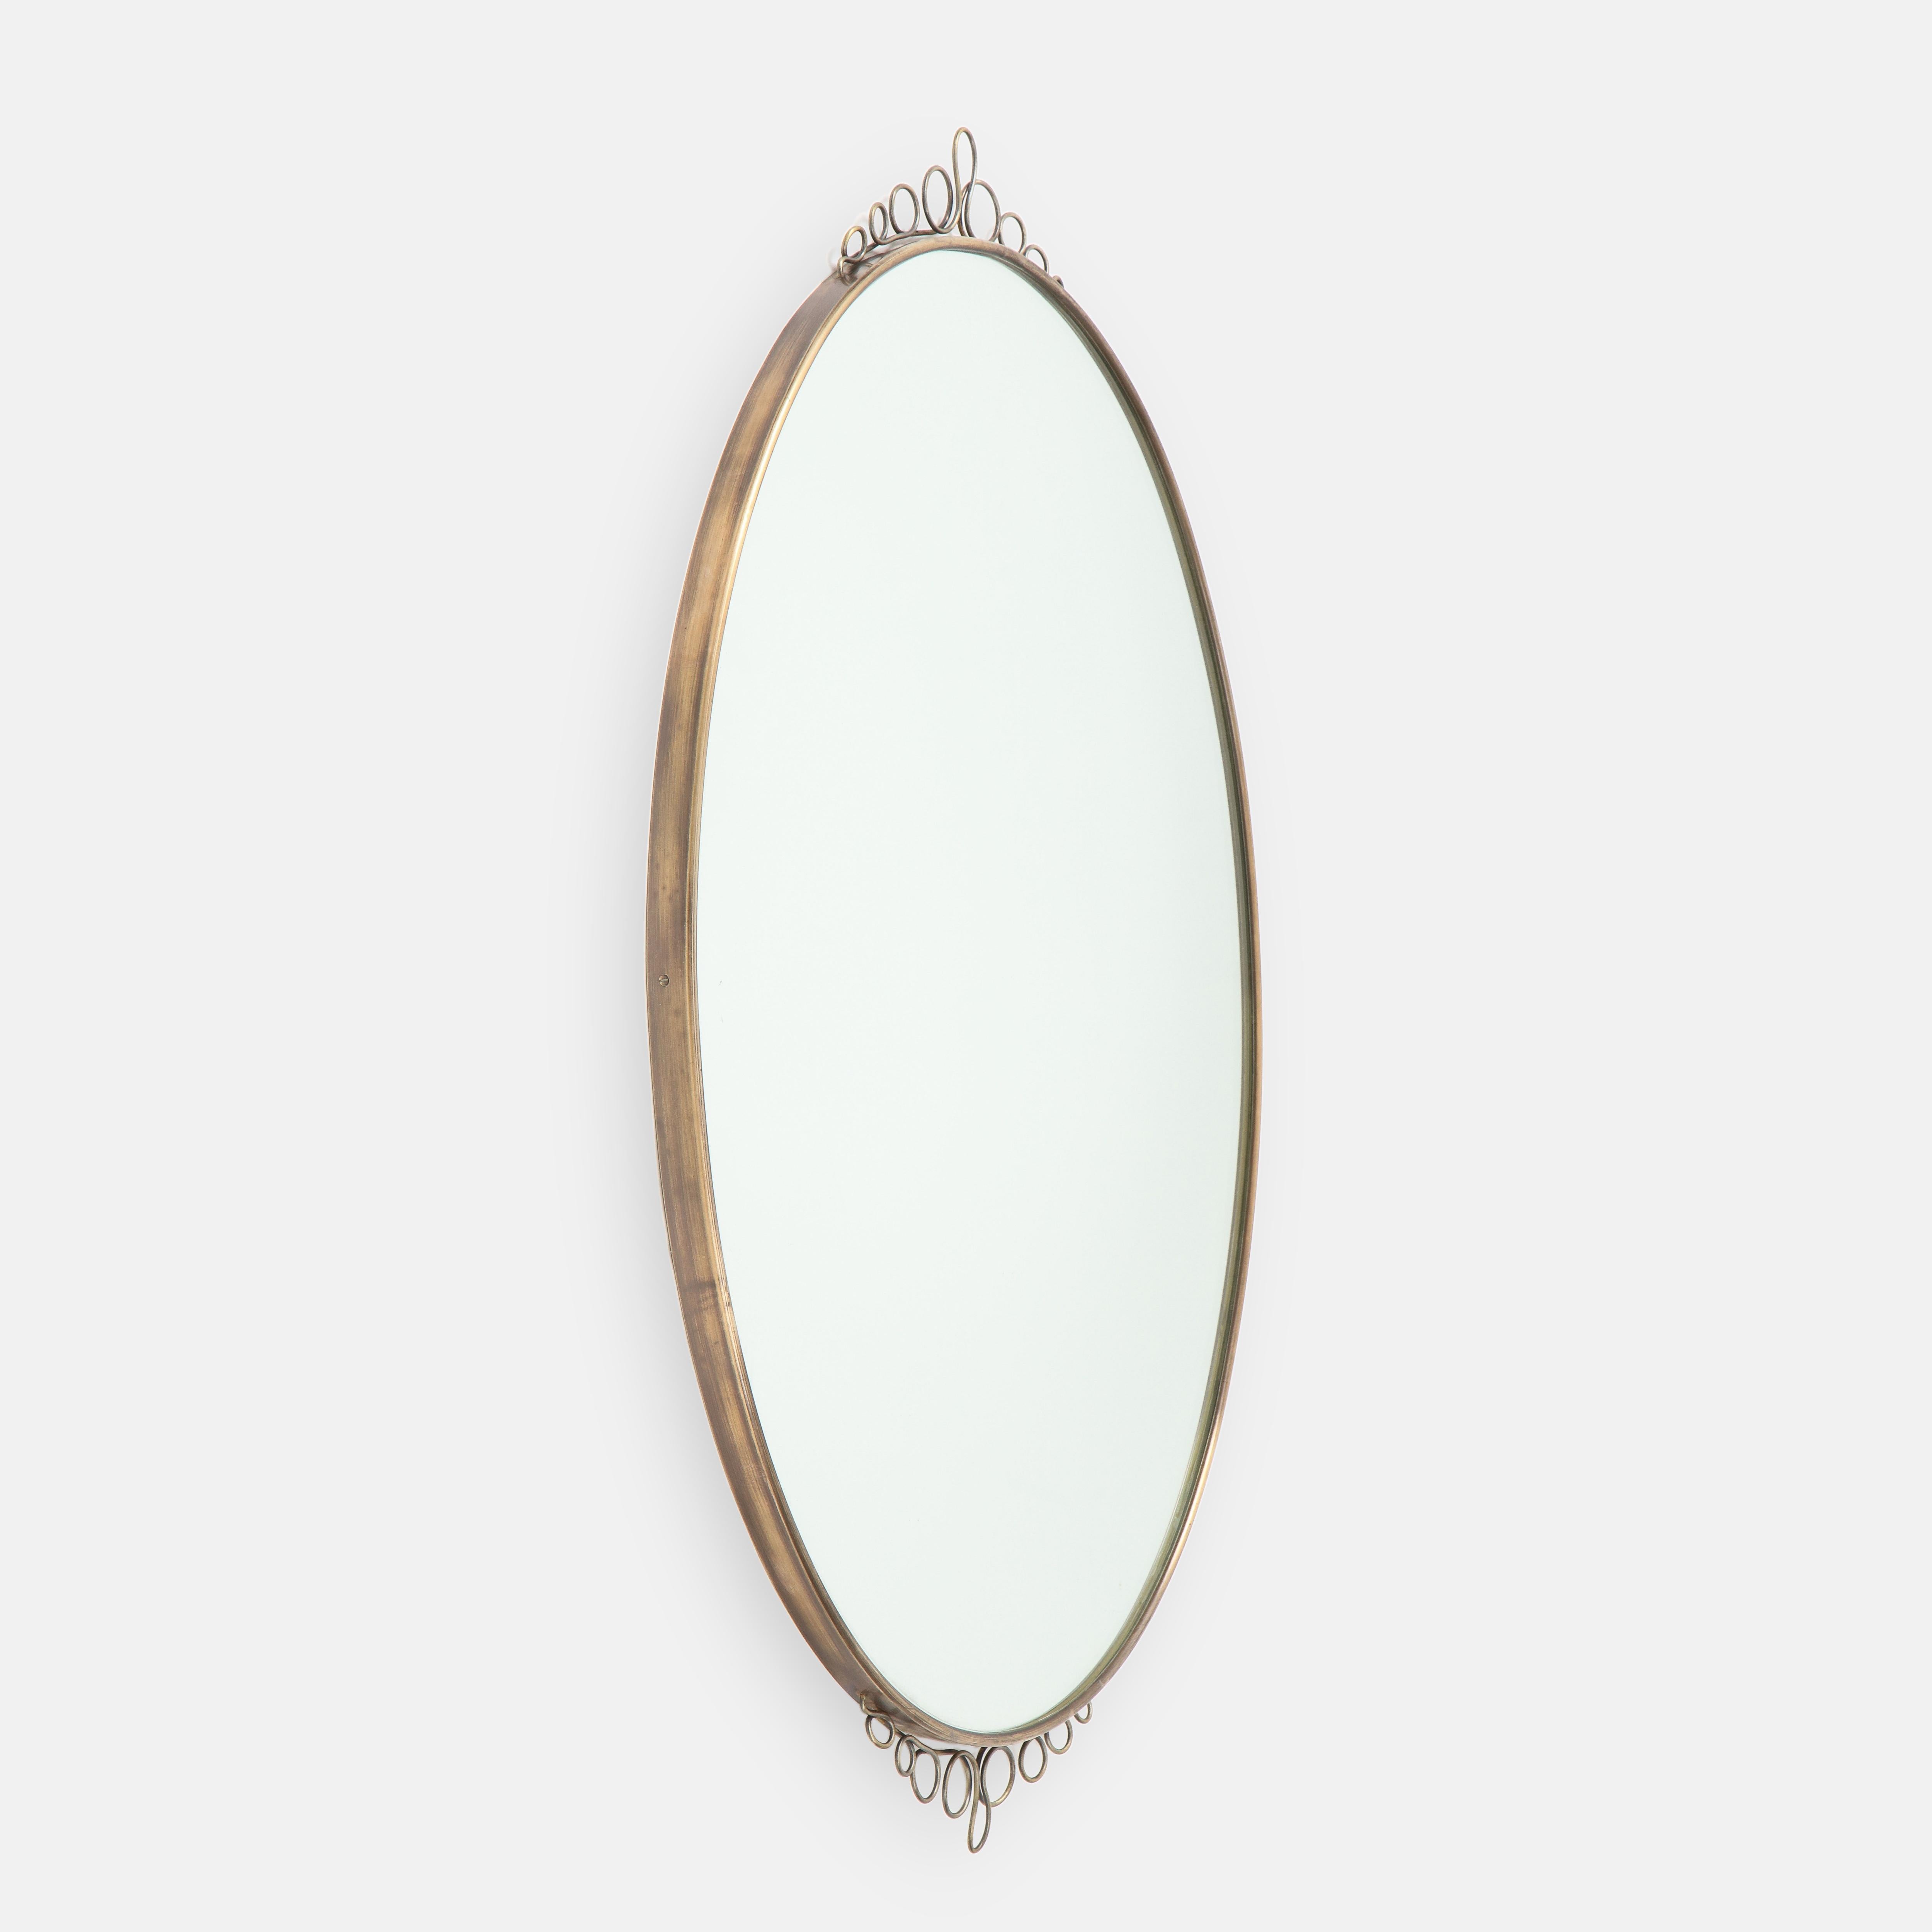 Elegant oval brass wall mirror with lovely decorative brass element on central top and bottom, Italy, 1960s. This charming midcentury mirror illustrates in its playful decorations Italian Novecento design characteristic of this period. The mirror